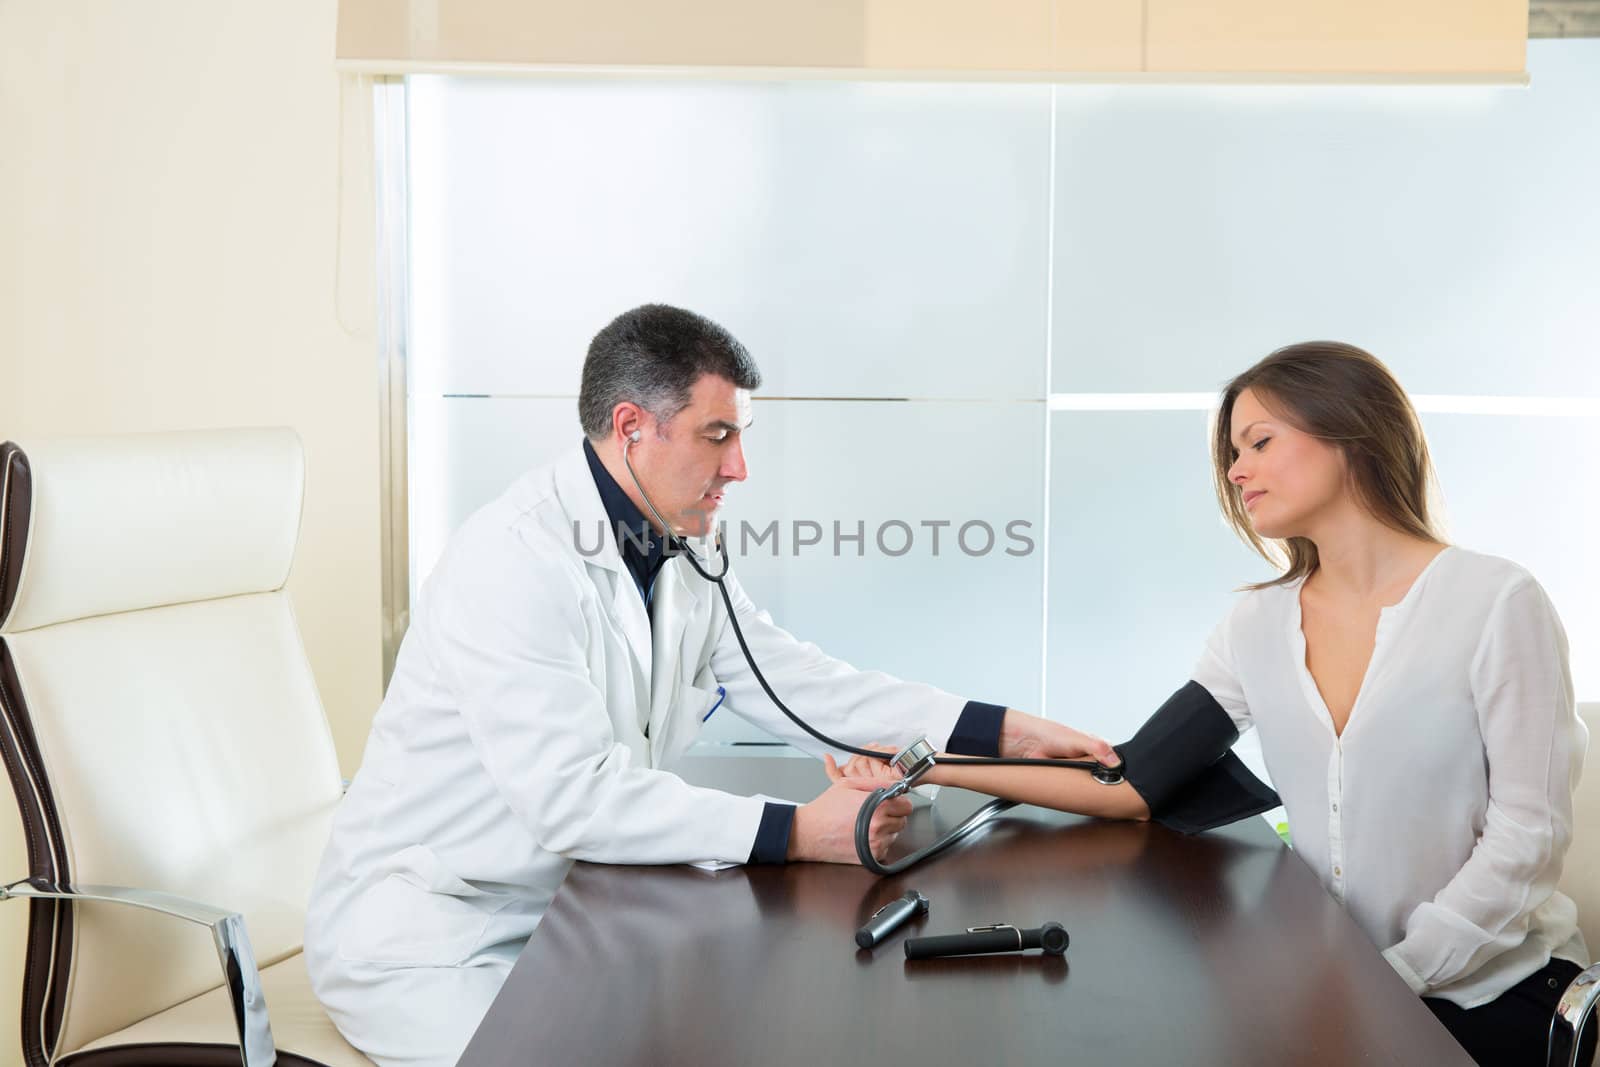 Doctor man checking blood pressure cuff on woman patient arm on hospital office